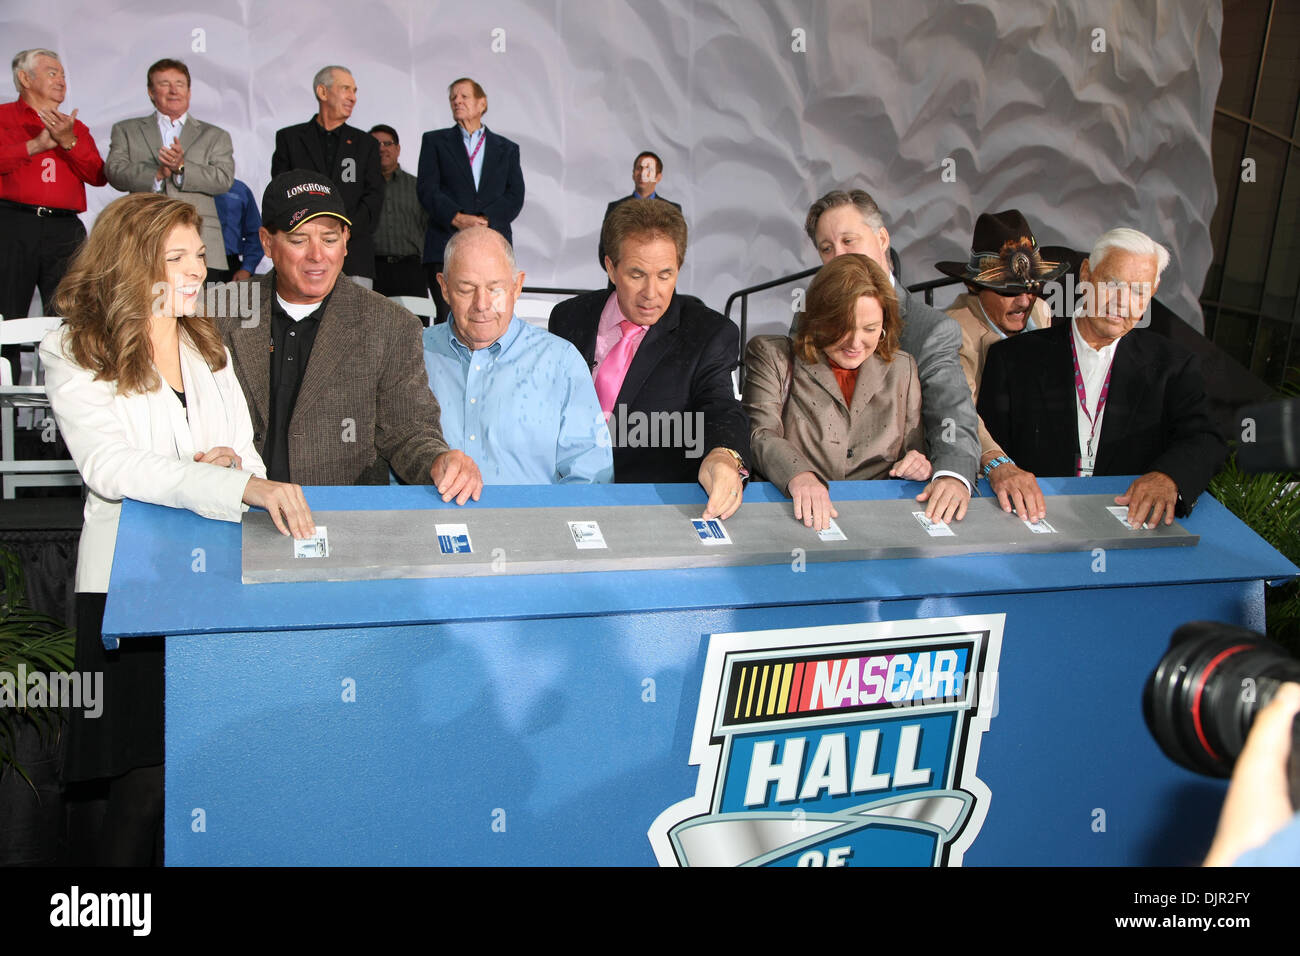 May 11, 2010 - Charlotte, North Carolina, U.S. - Grand Opening of the Nascar Hall of Fame festivities saw from left, TERESA EARNHARDT, RON HORNADAY JR., JACK INGRAM, DARELL WALTRIP, LISA FRANCE KENNEDY, BRIAN FRANCE (behind Lisa France Kennedy), RICHARD PETTY and JUNIOR JOHNSON officially open the Hall. The Nascar Hall of Fame is located in Charlotte, North Carolina.  (Credit Image Stock Photo